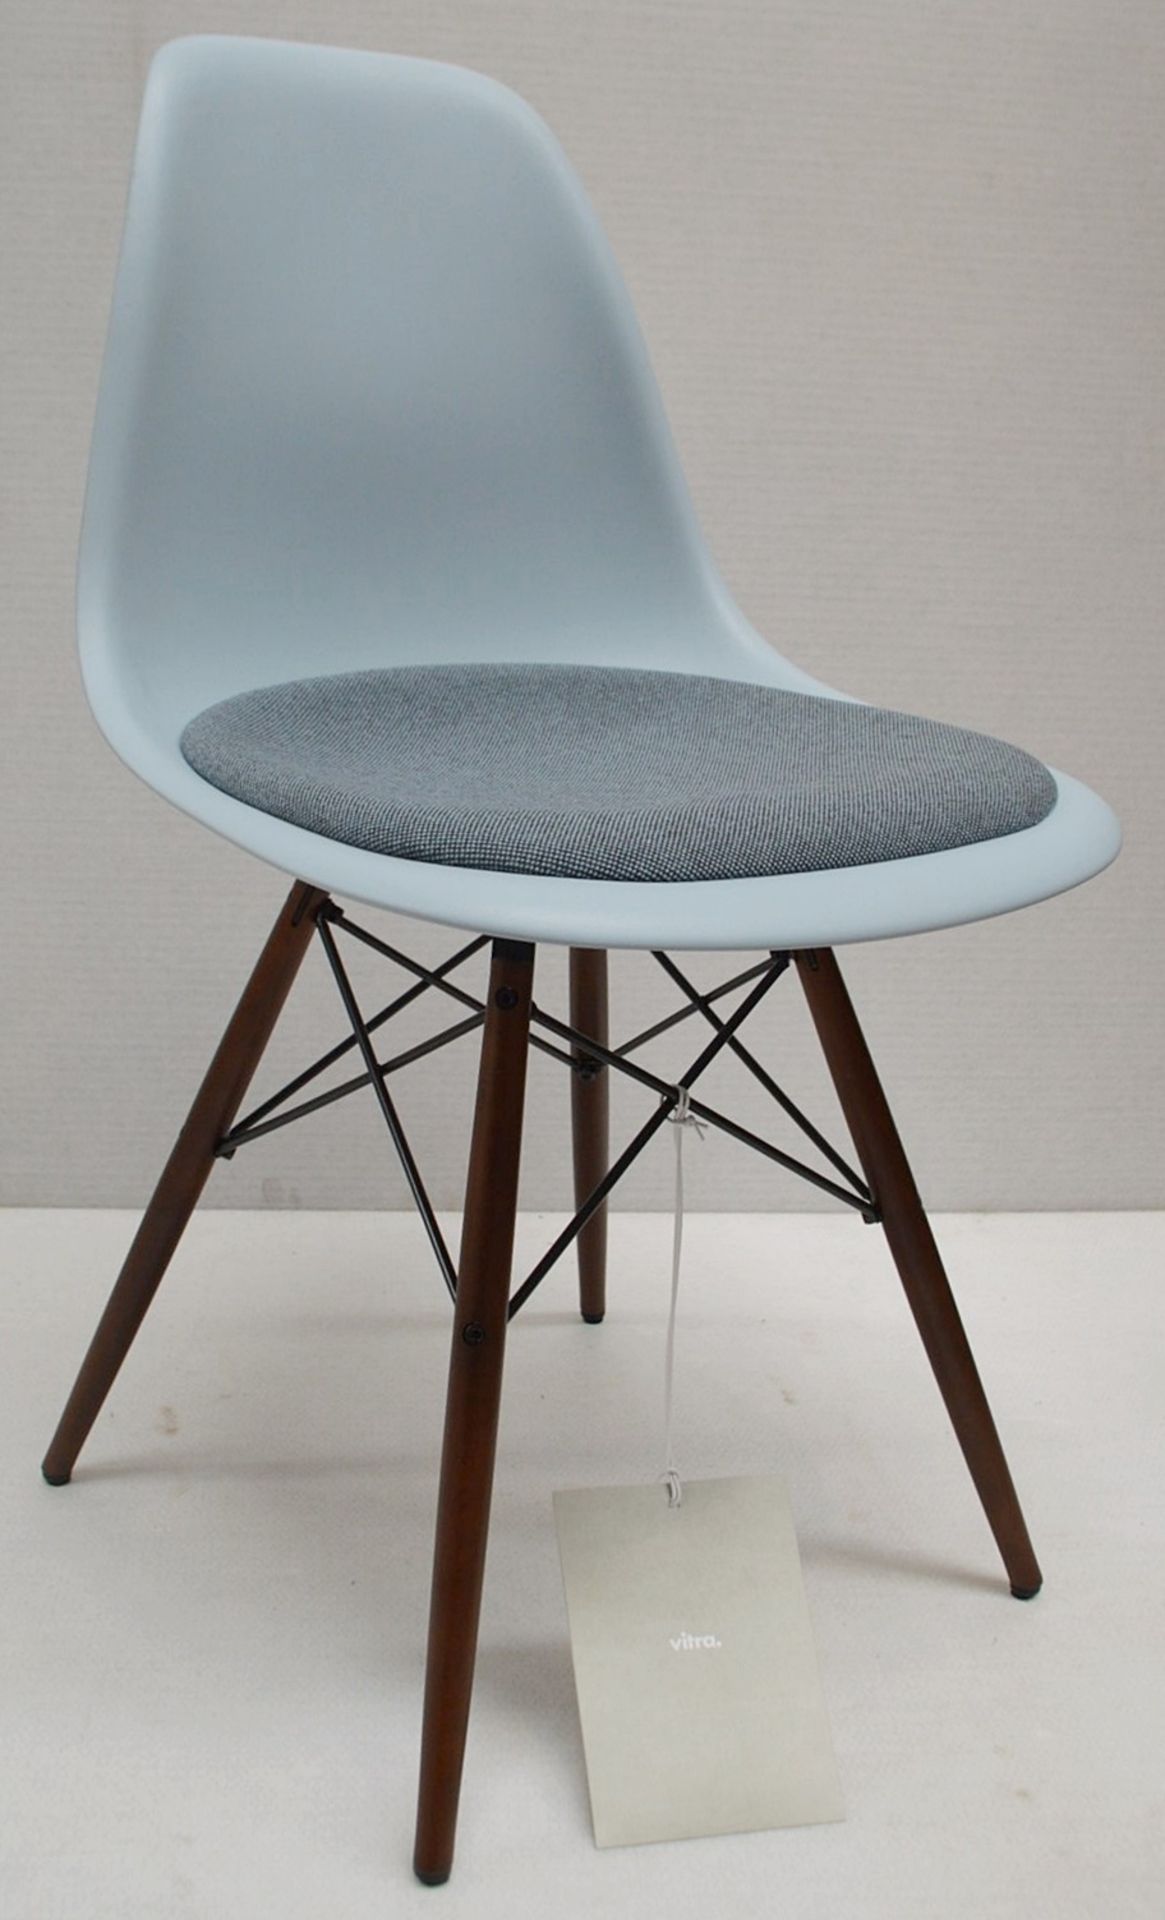 Set Of 4 x VITRA Eames DSW Designer Side Chairs With Upholsted Seats And Maple Bases In A Dark Stain - Image 4 of 11